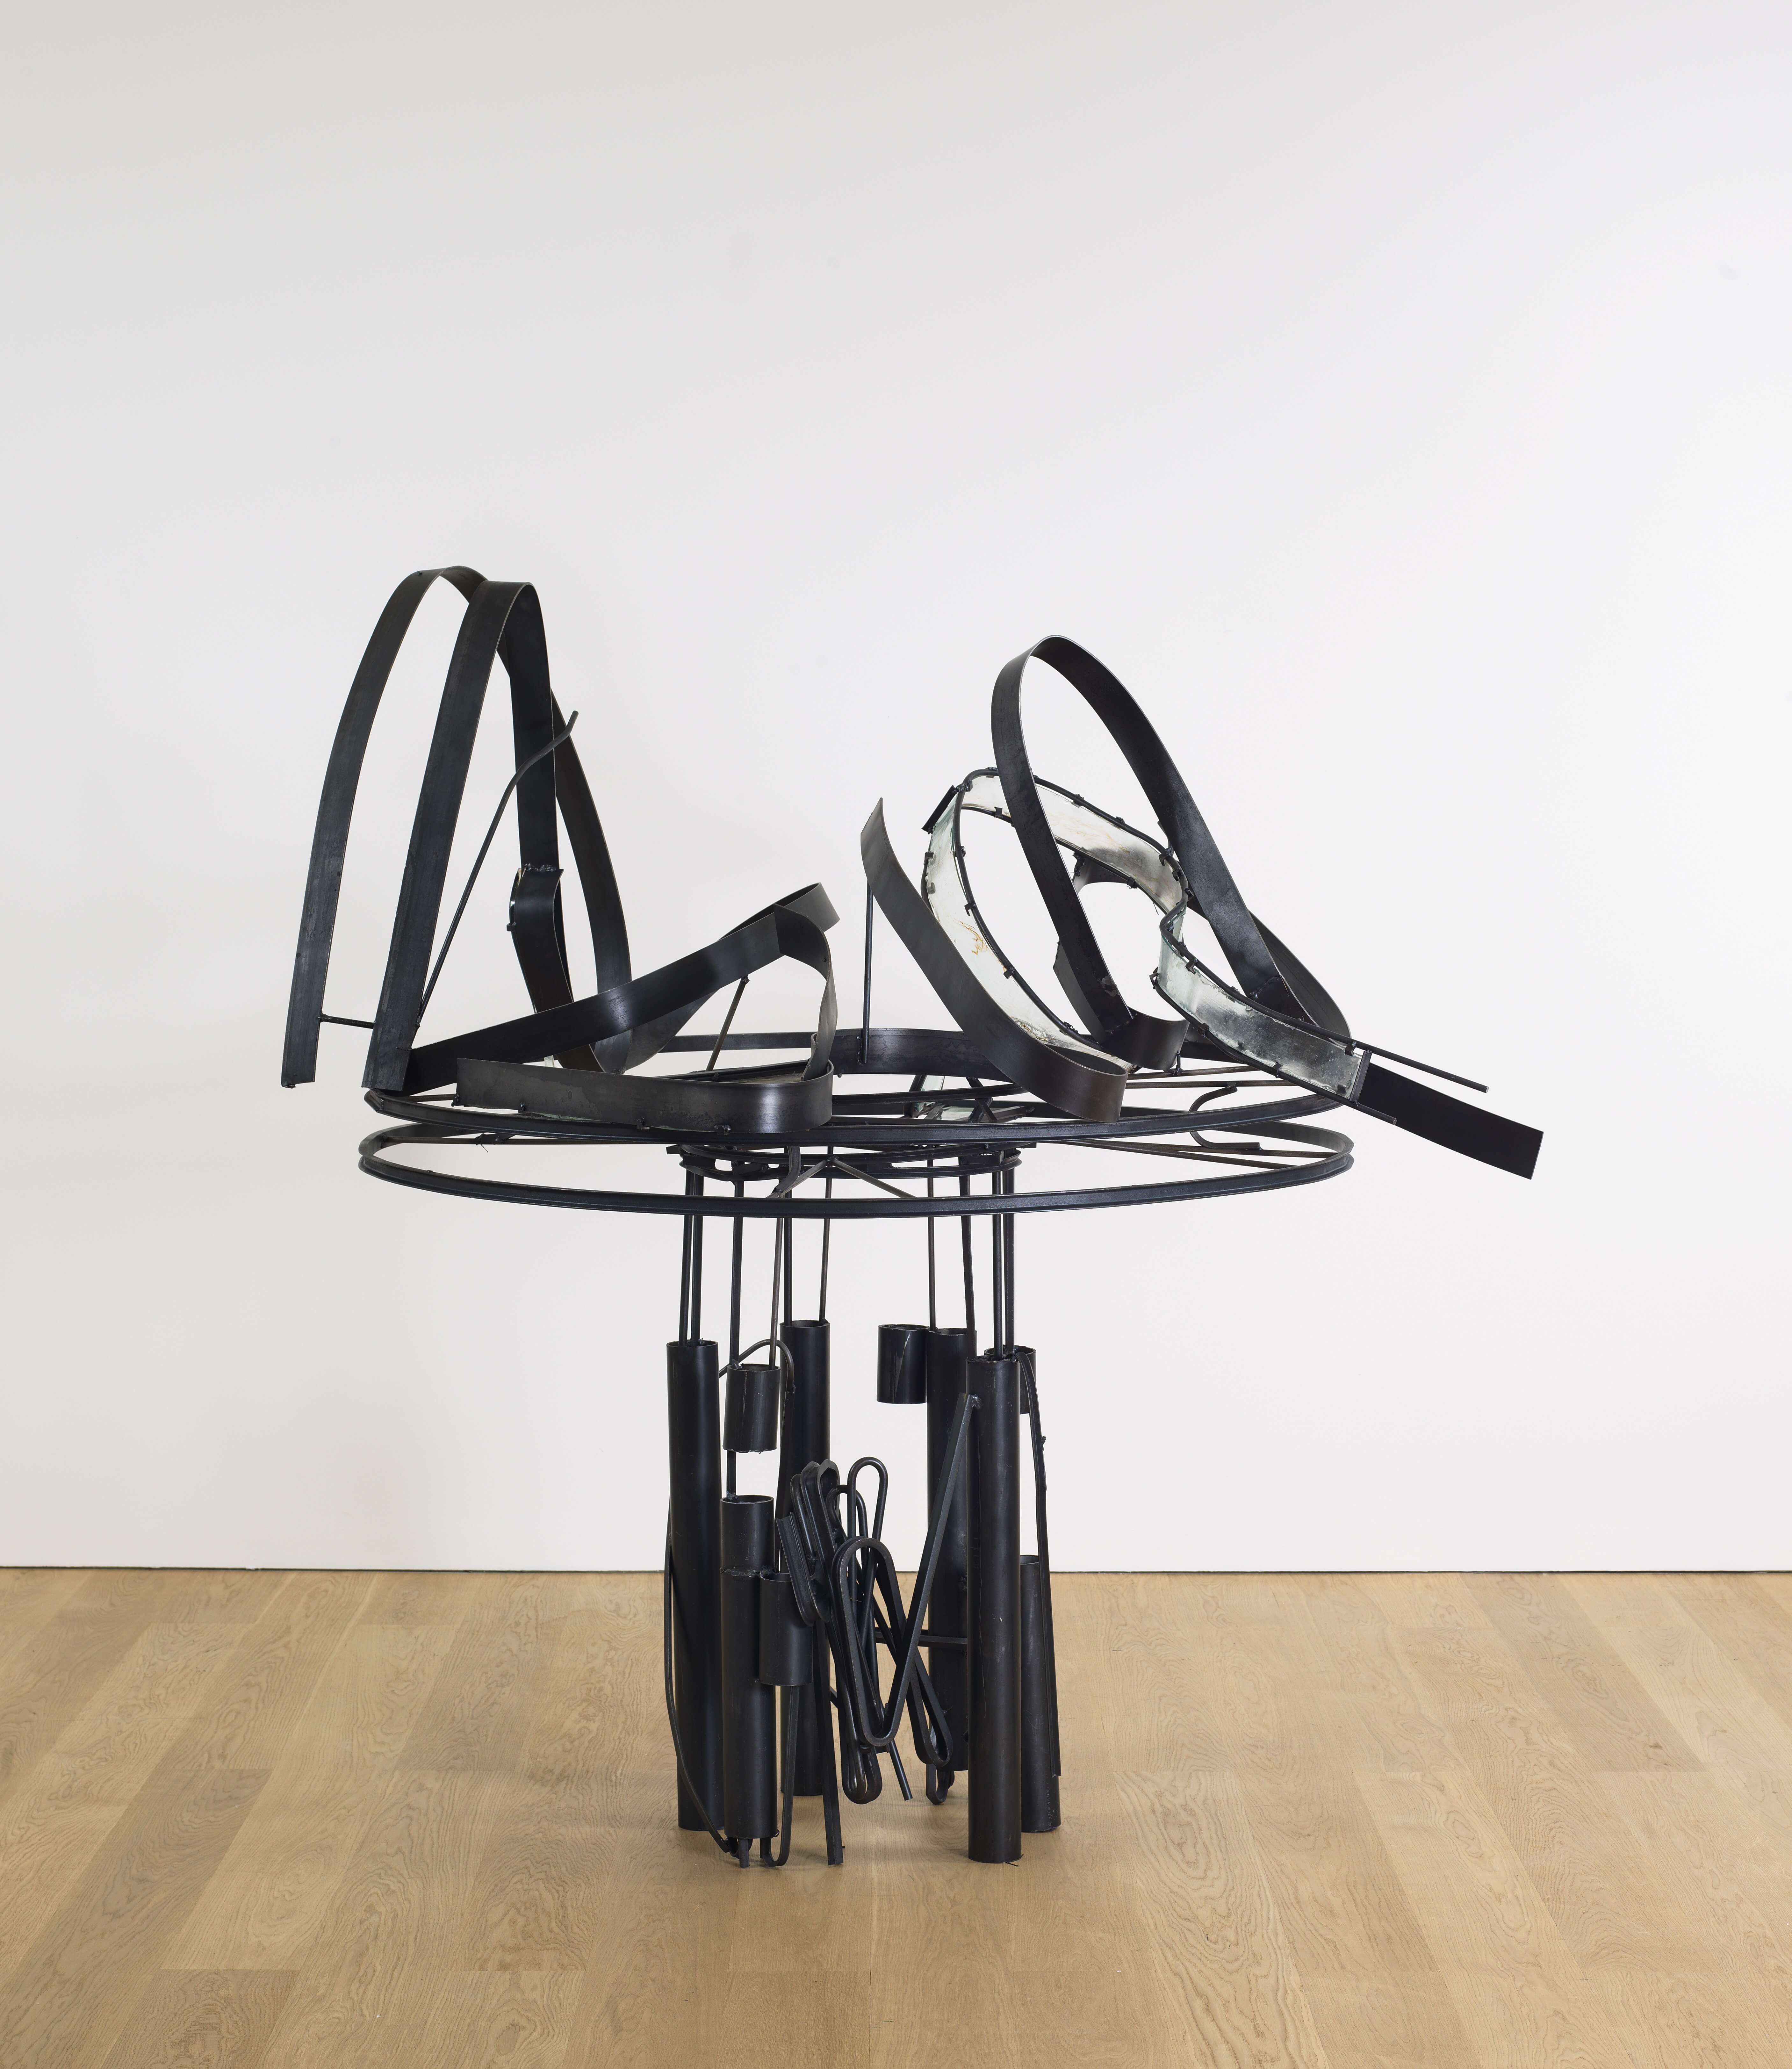 The Table, Steel, resin, 72 x 74 x 58 inches, 2014 copy